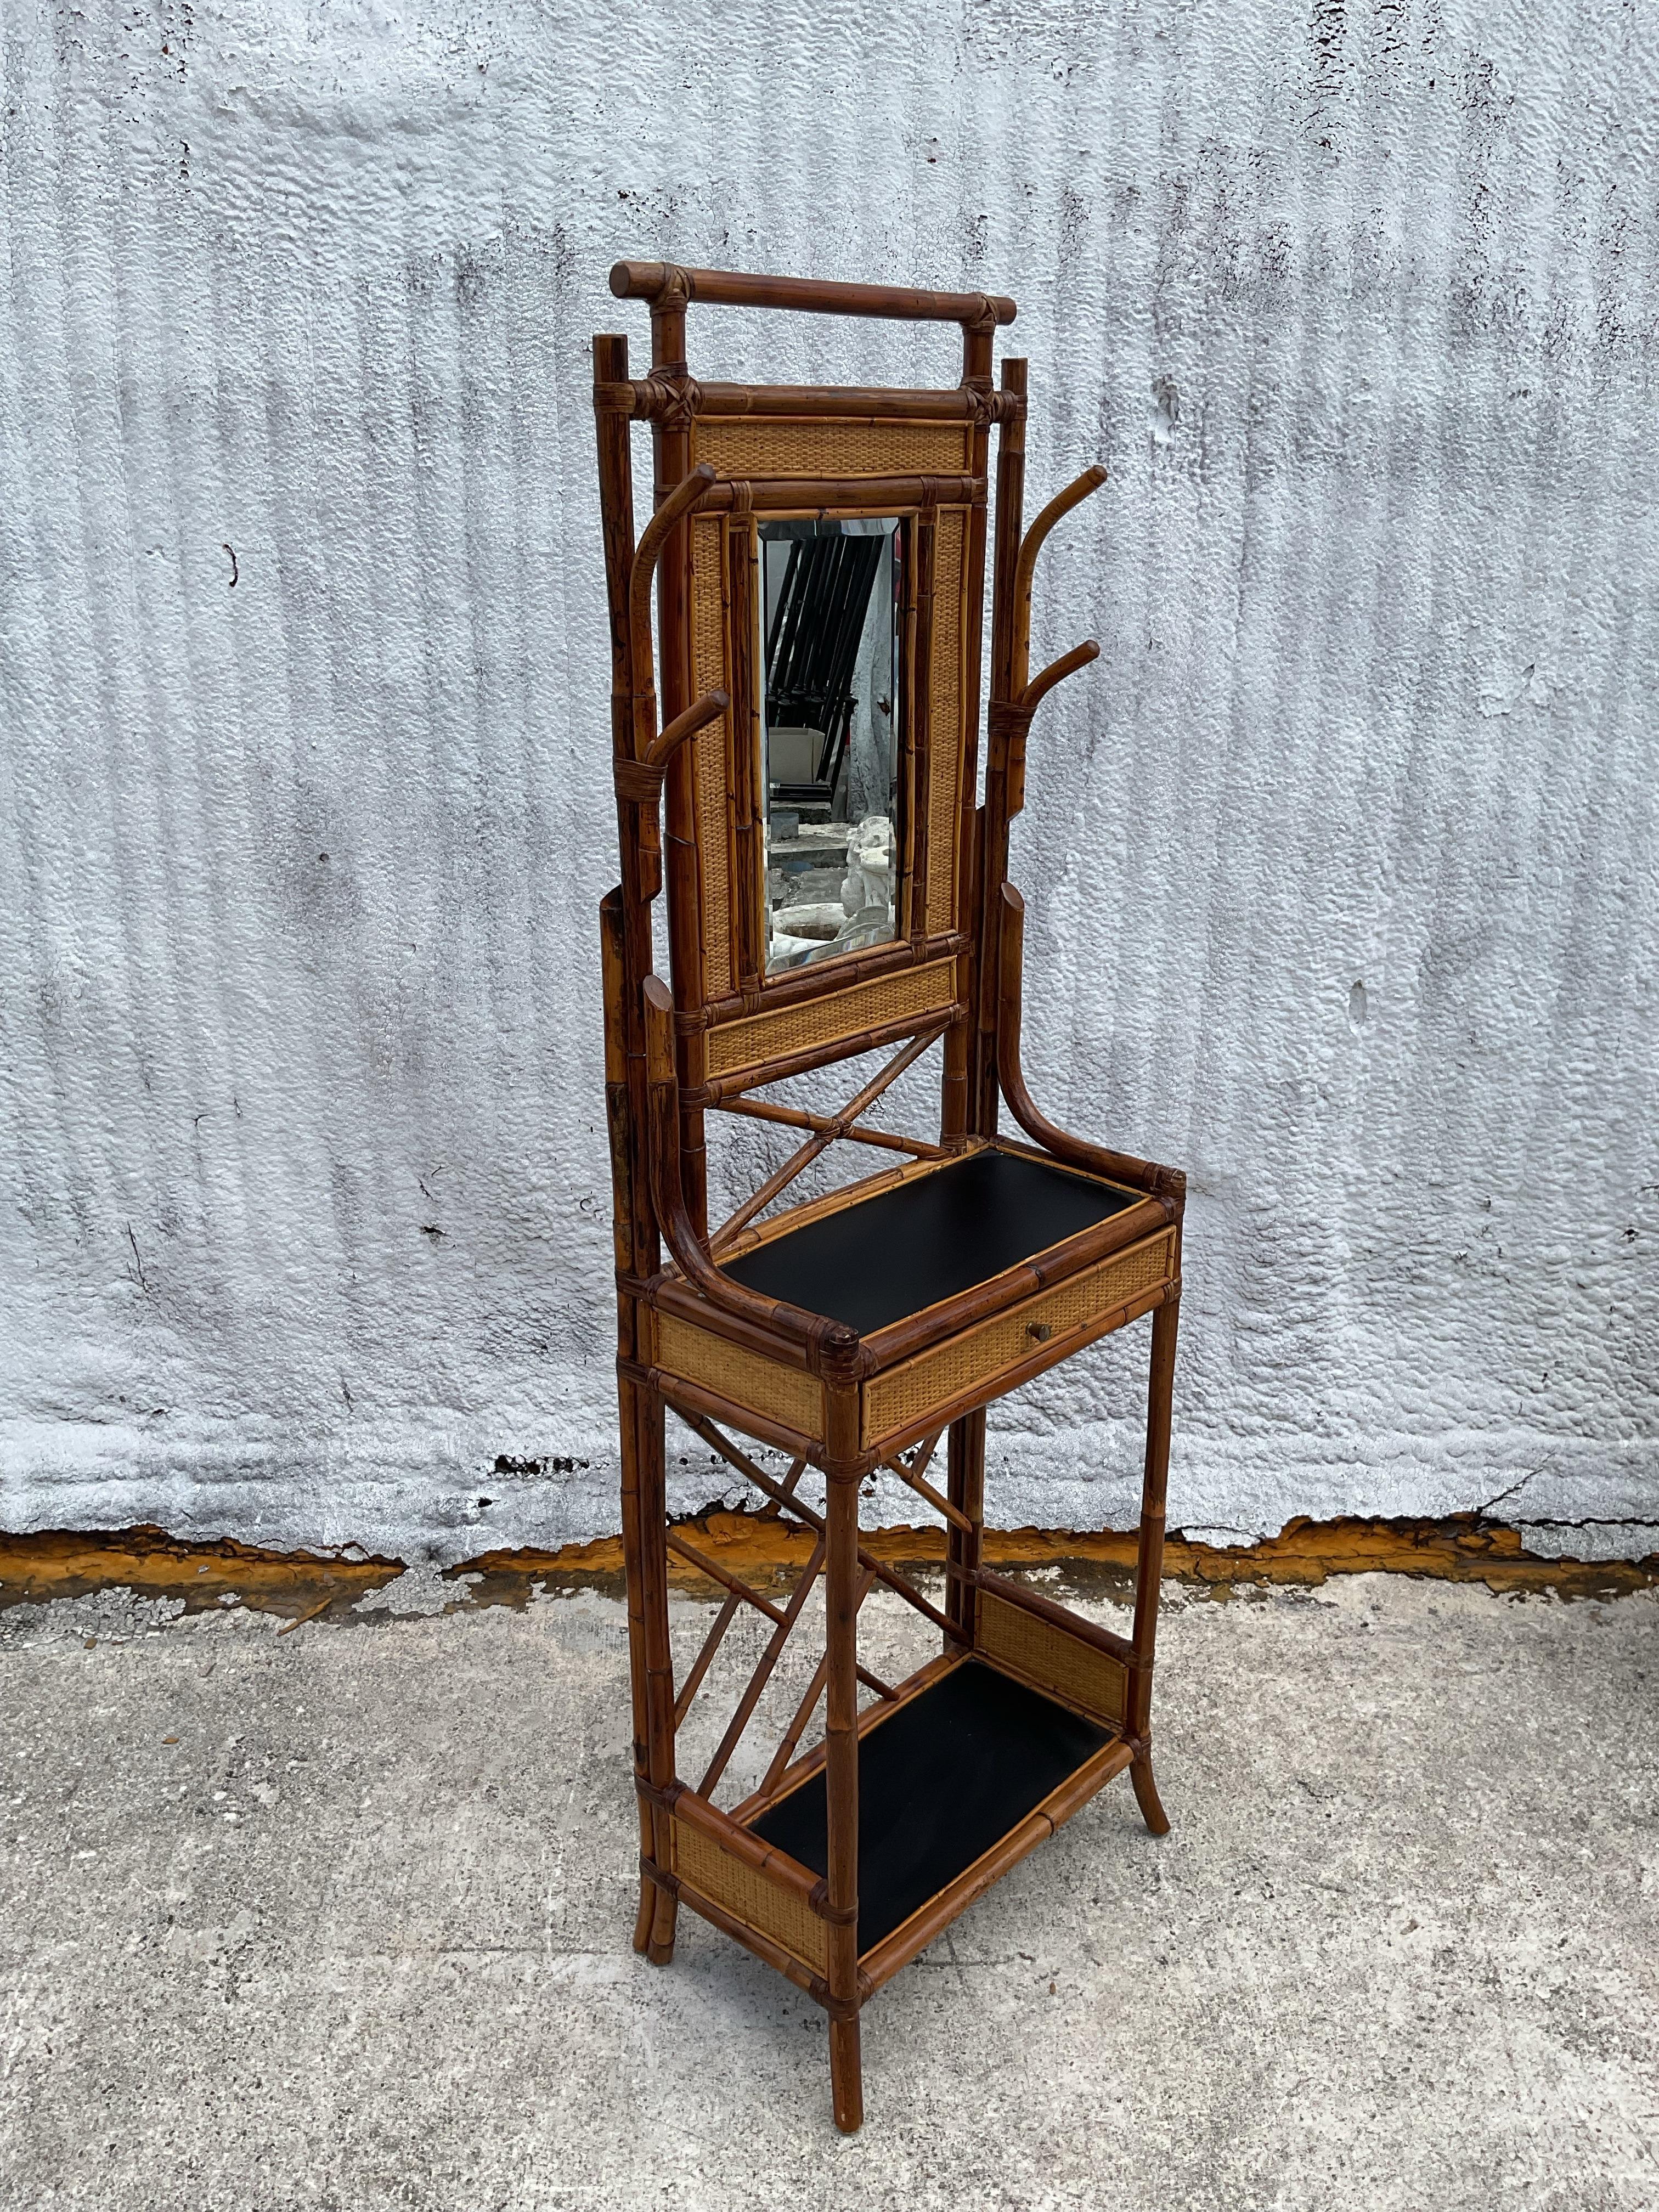 A fabulous vintage Regency hall tree. Chic burnt bamboo frame with inset woven rattan panels. Lacquered top shelf and a mirror. Acquired from a Palm Beach estate